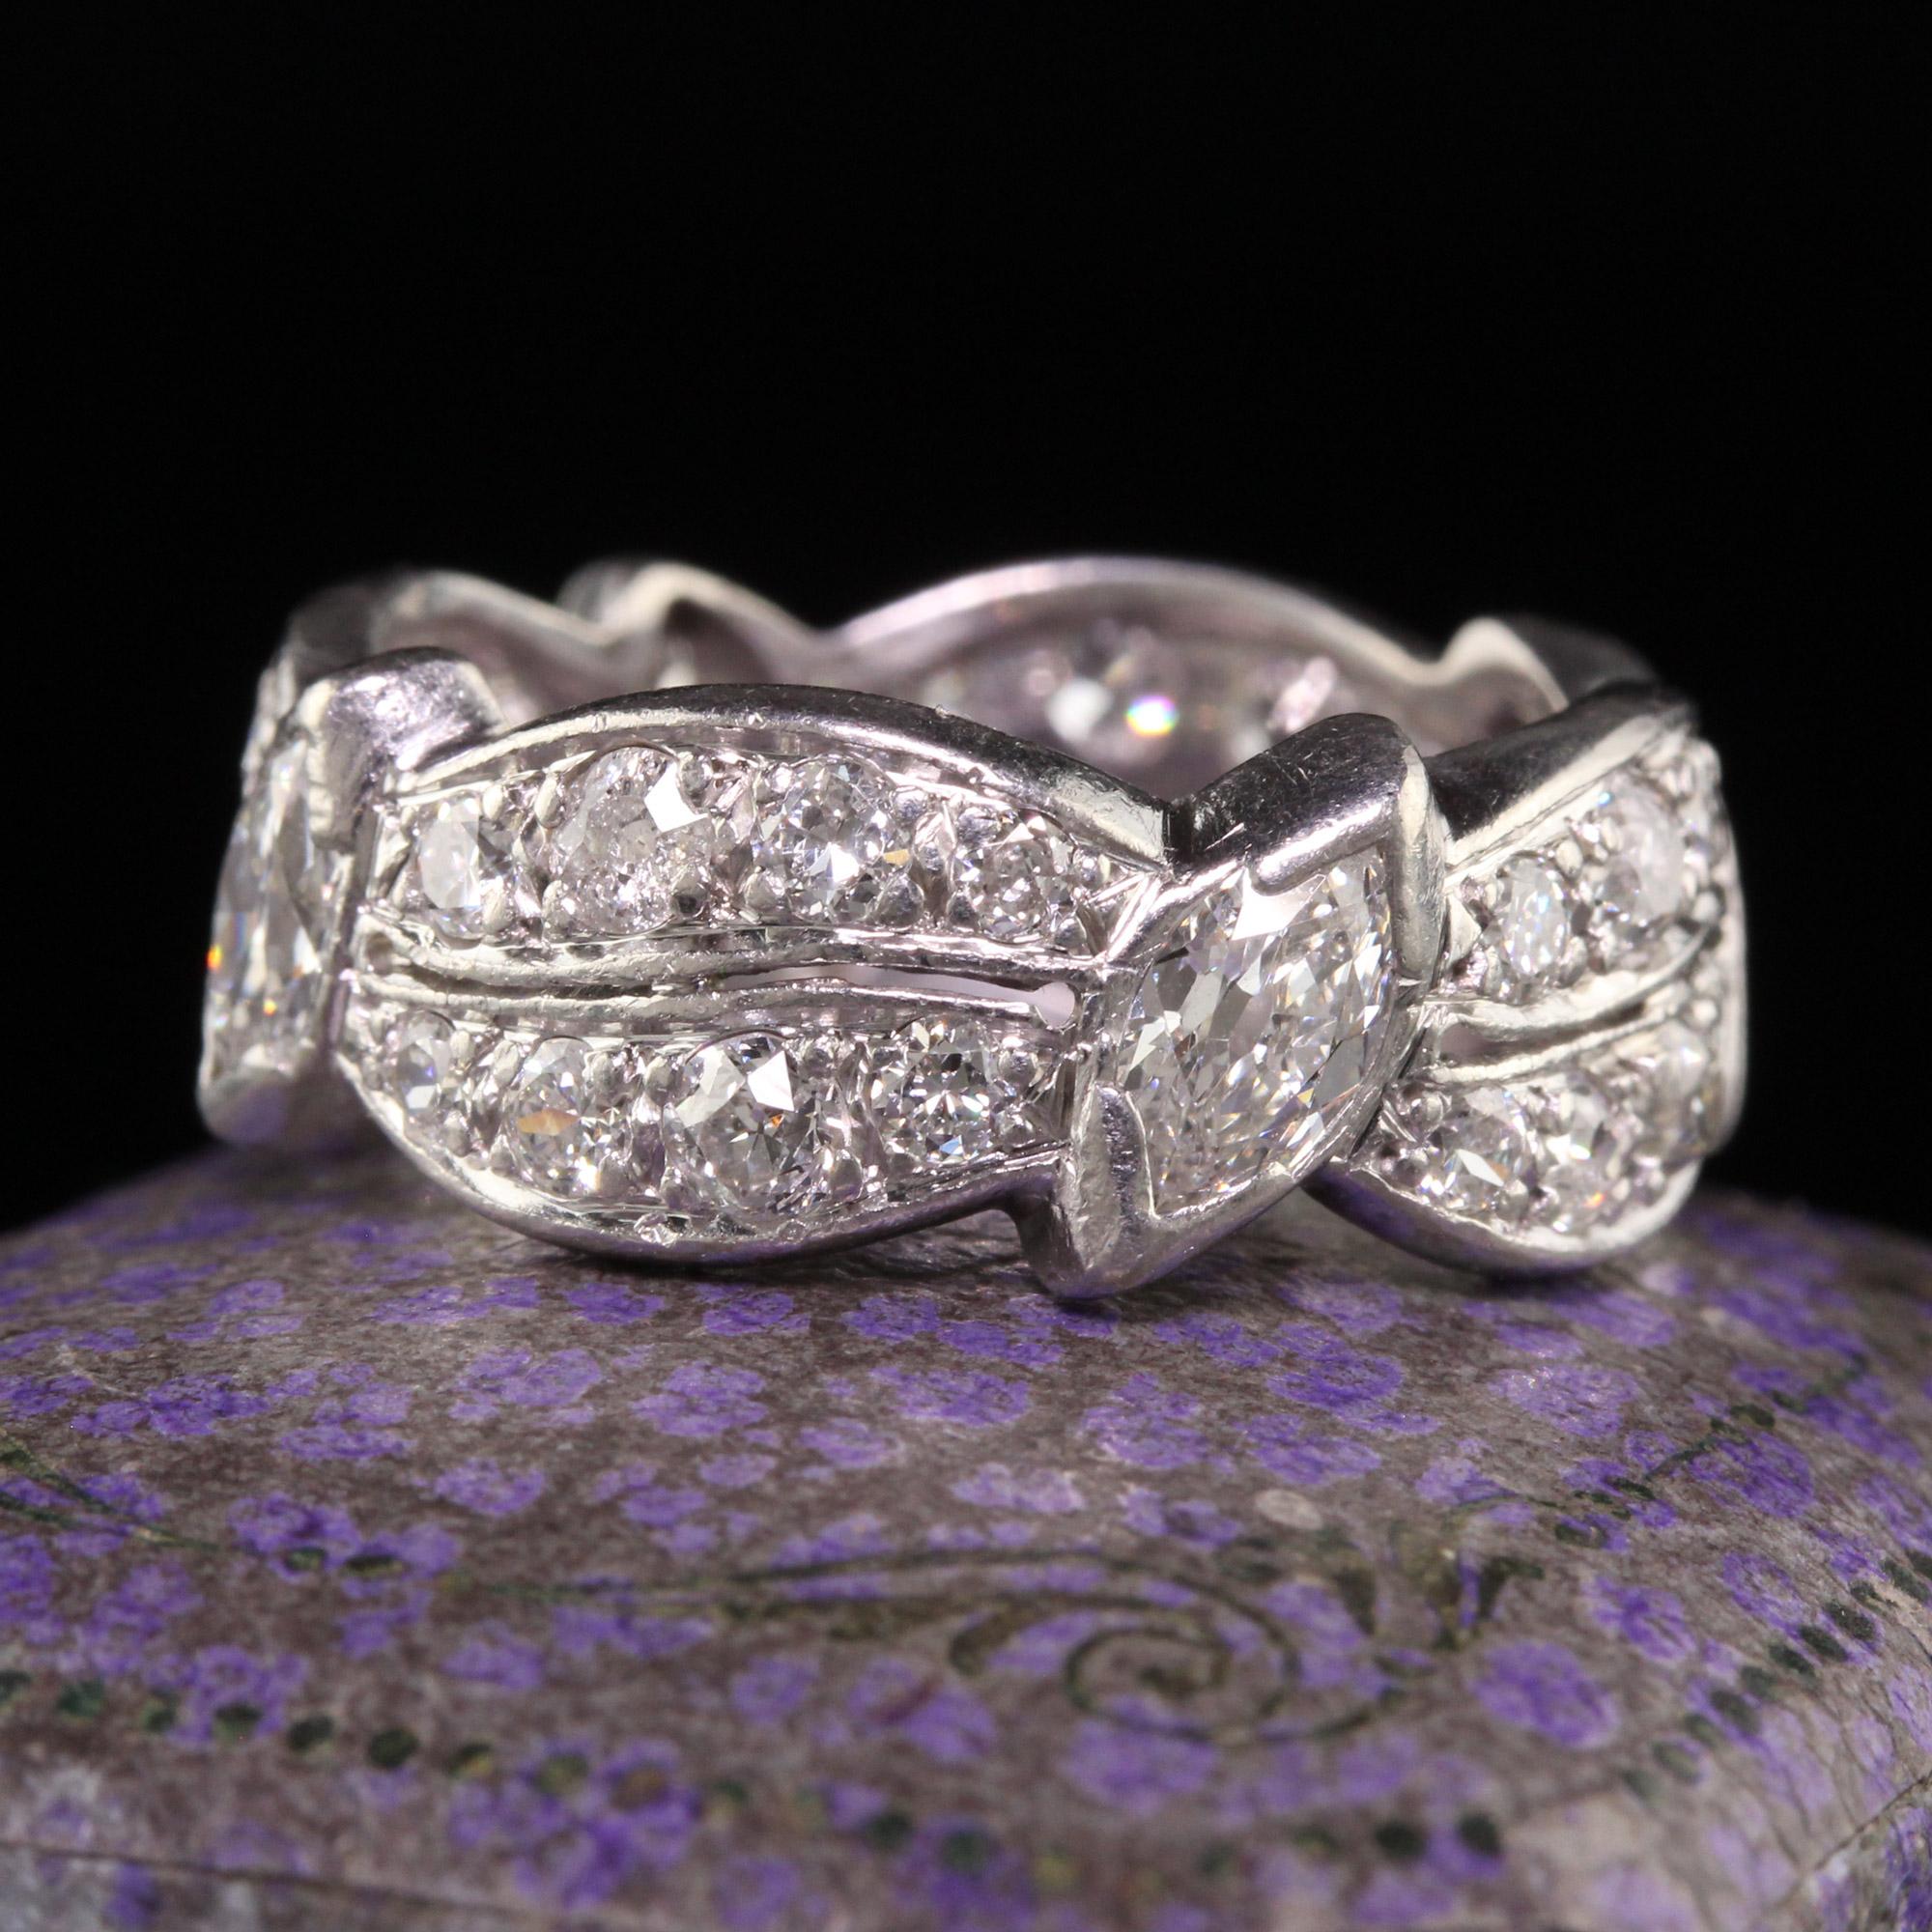 Beautiful Antique Art Deco Platinum Old European and Marquise Eternity Band - Size 6 3/4. This incredible eternity ring is crafted in platinum. This beautiful ring has old european cut diamonds set around the entire band. There are two stations